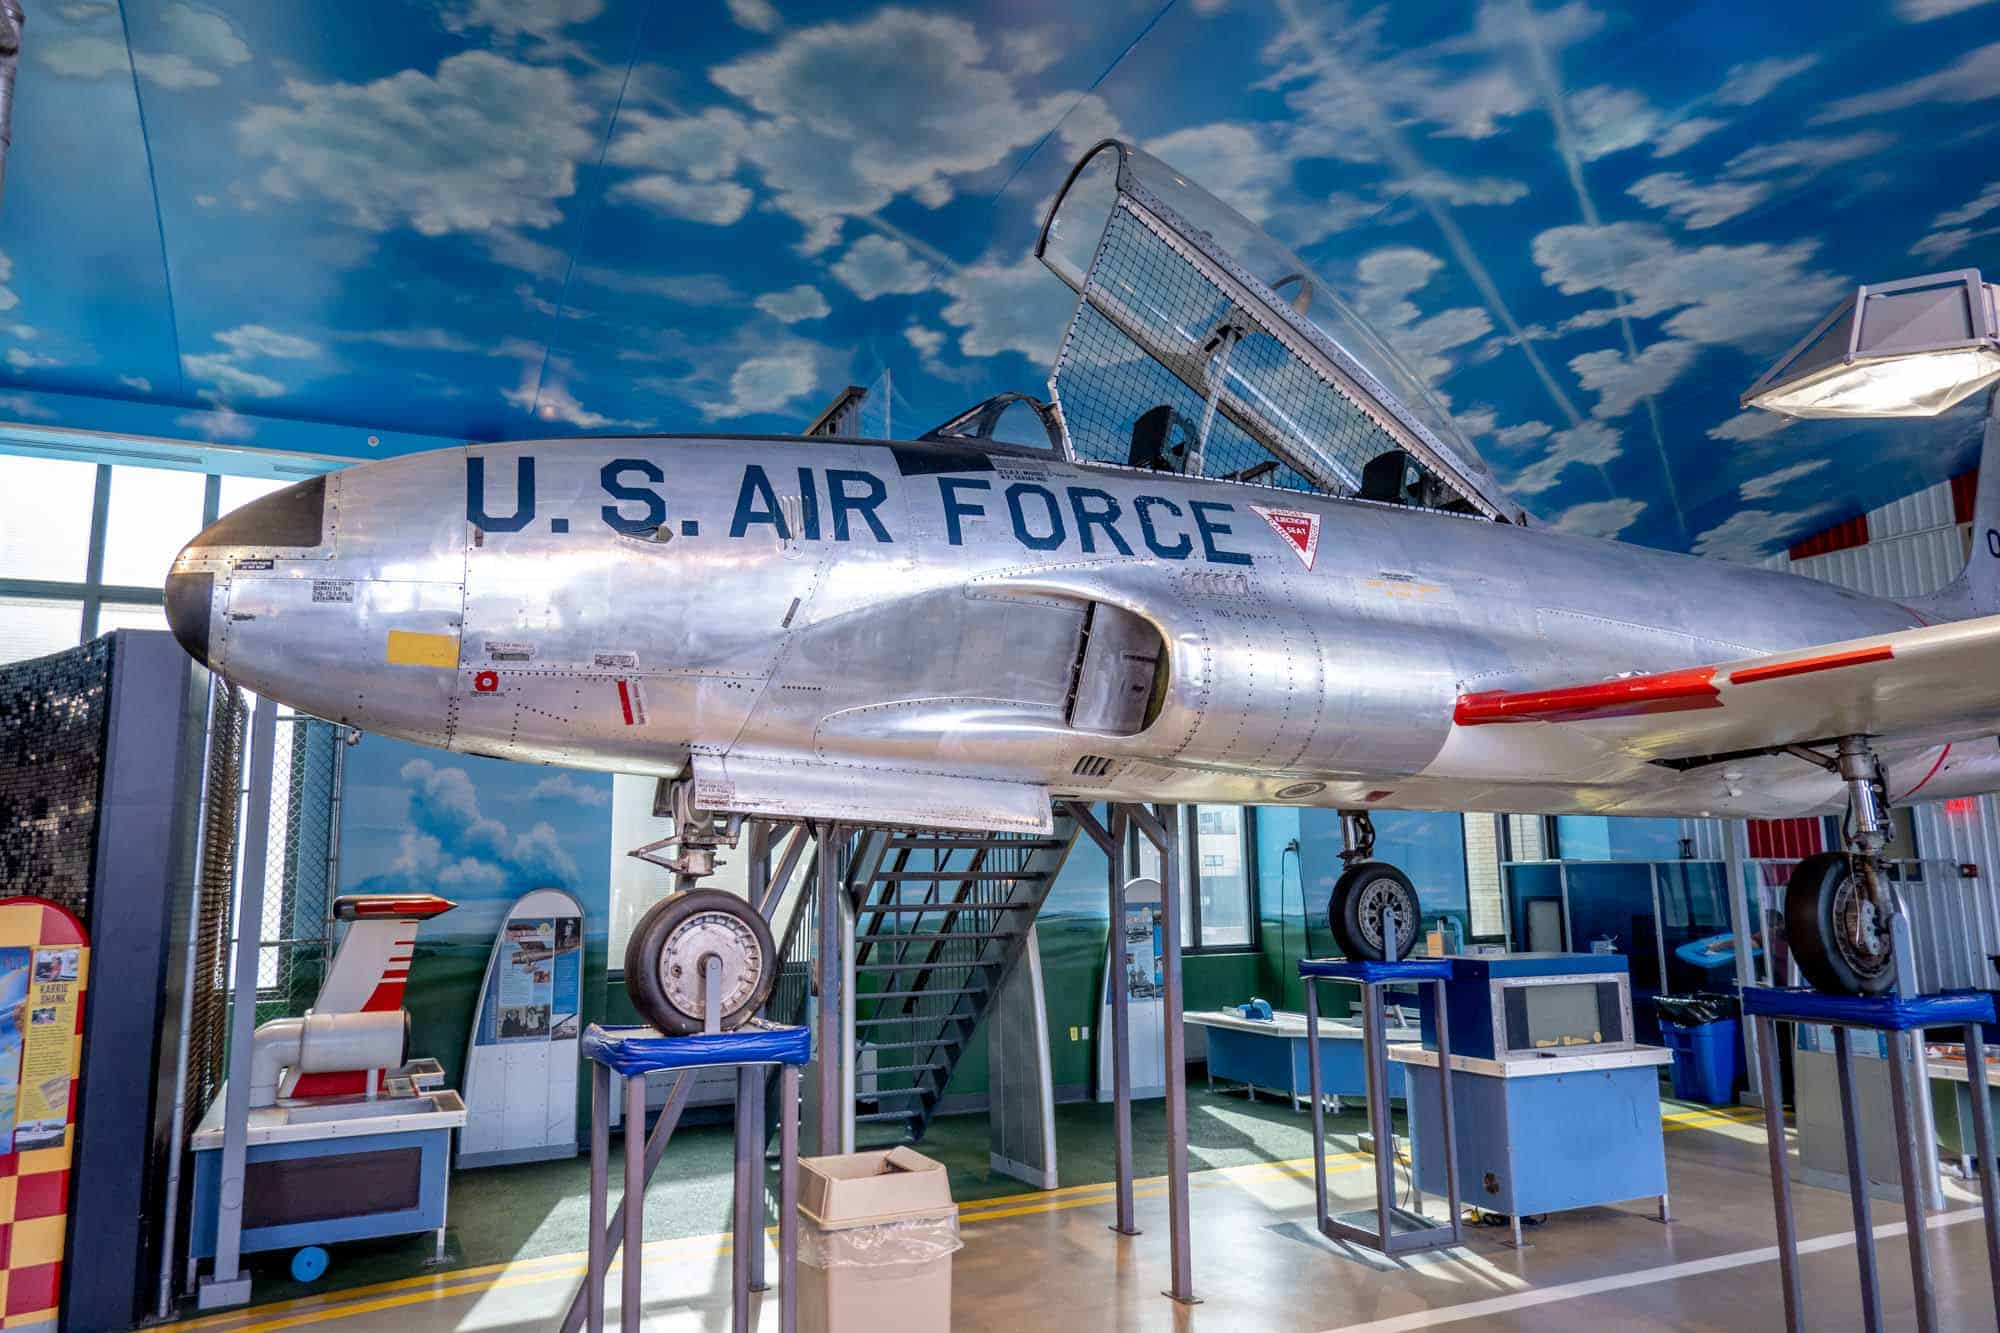 Air Force jet on display in a kids' museum